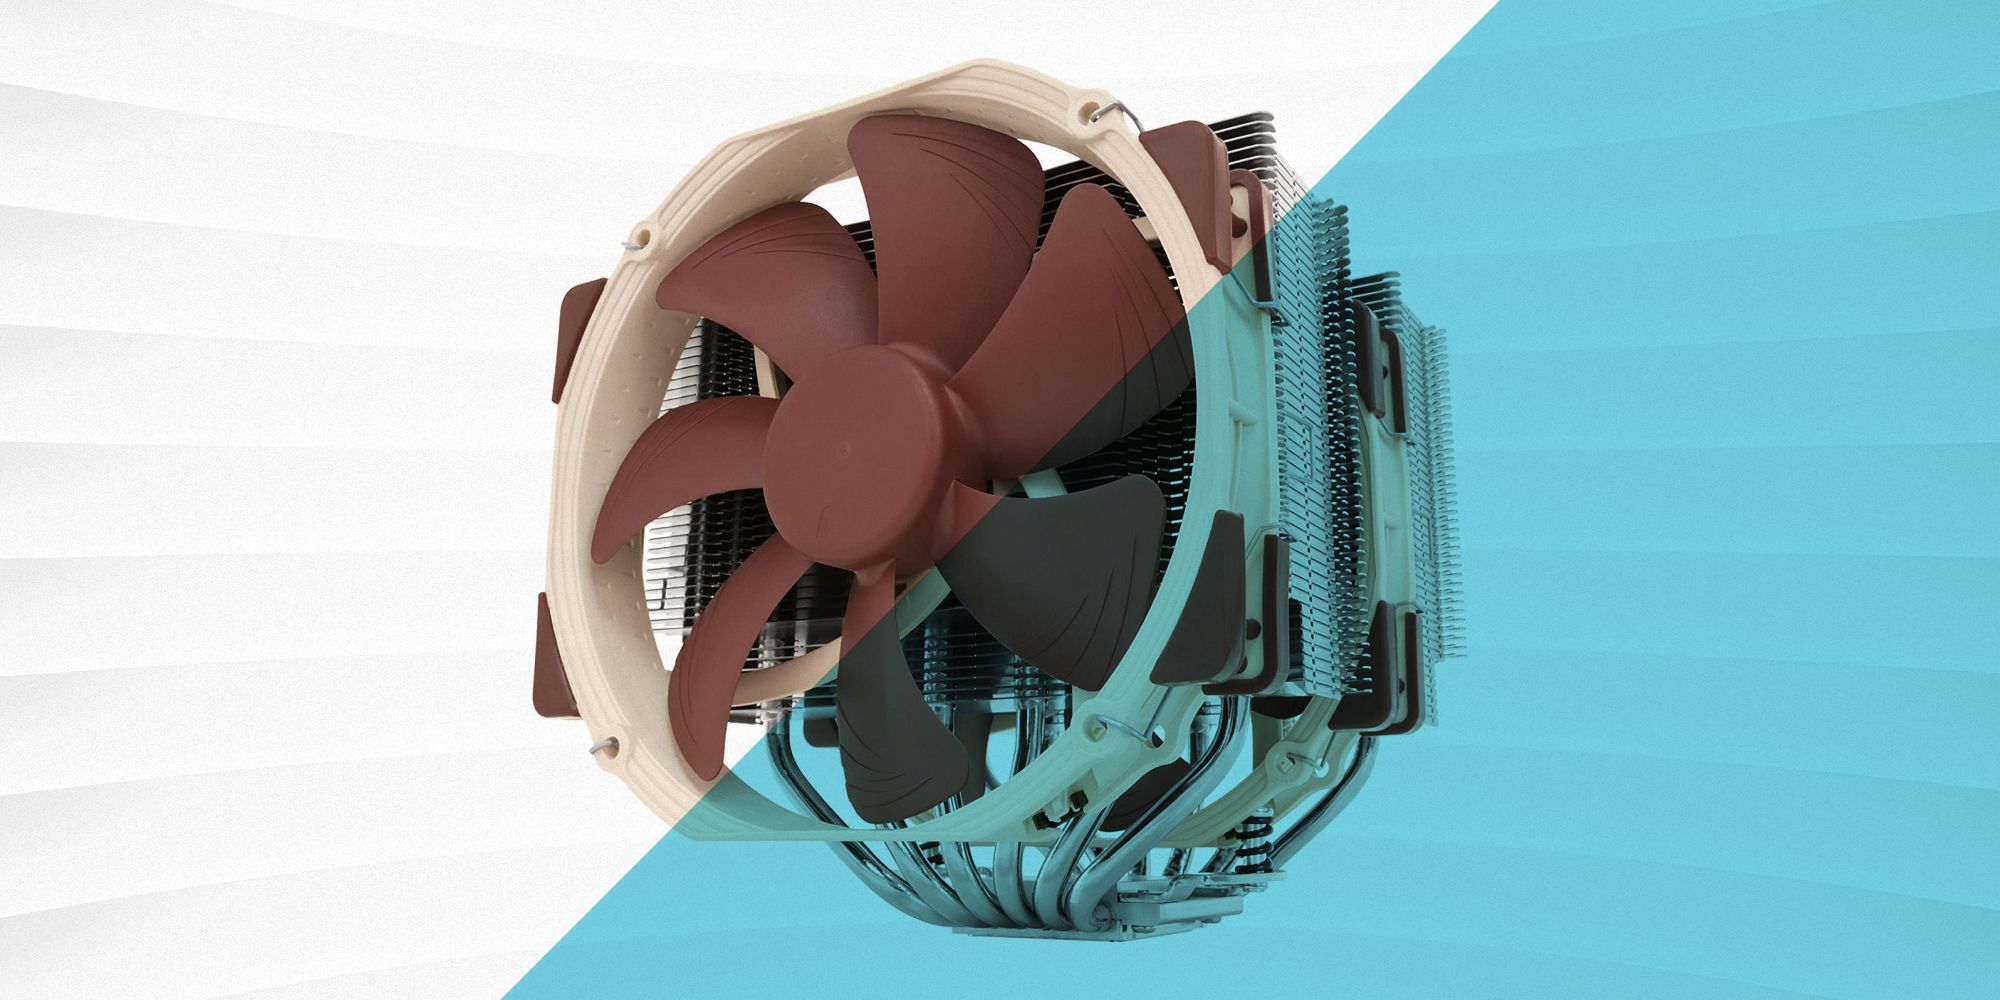 The 10 Best CPU Coolers in 2021 - Liquid and Air CPU Coolers